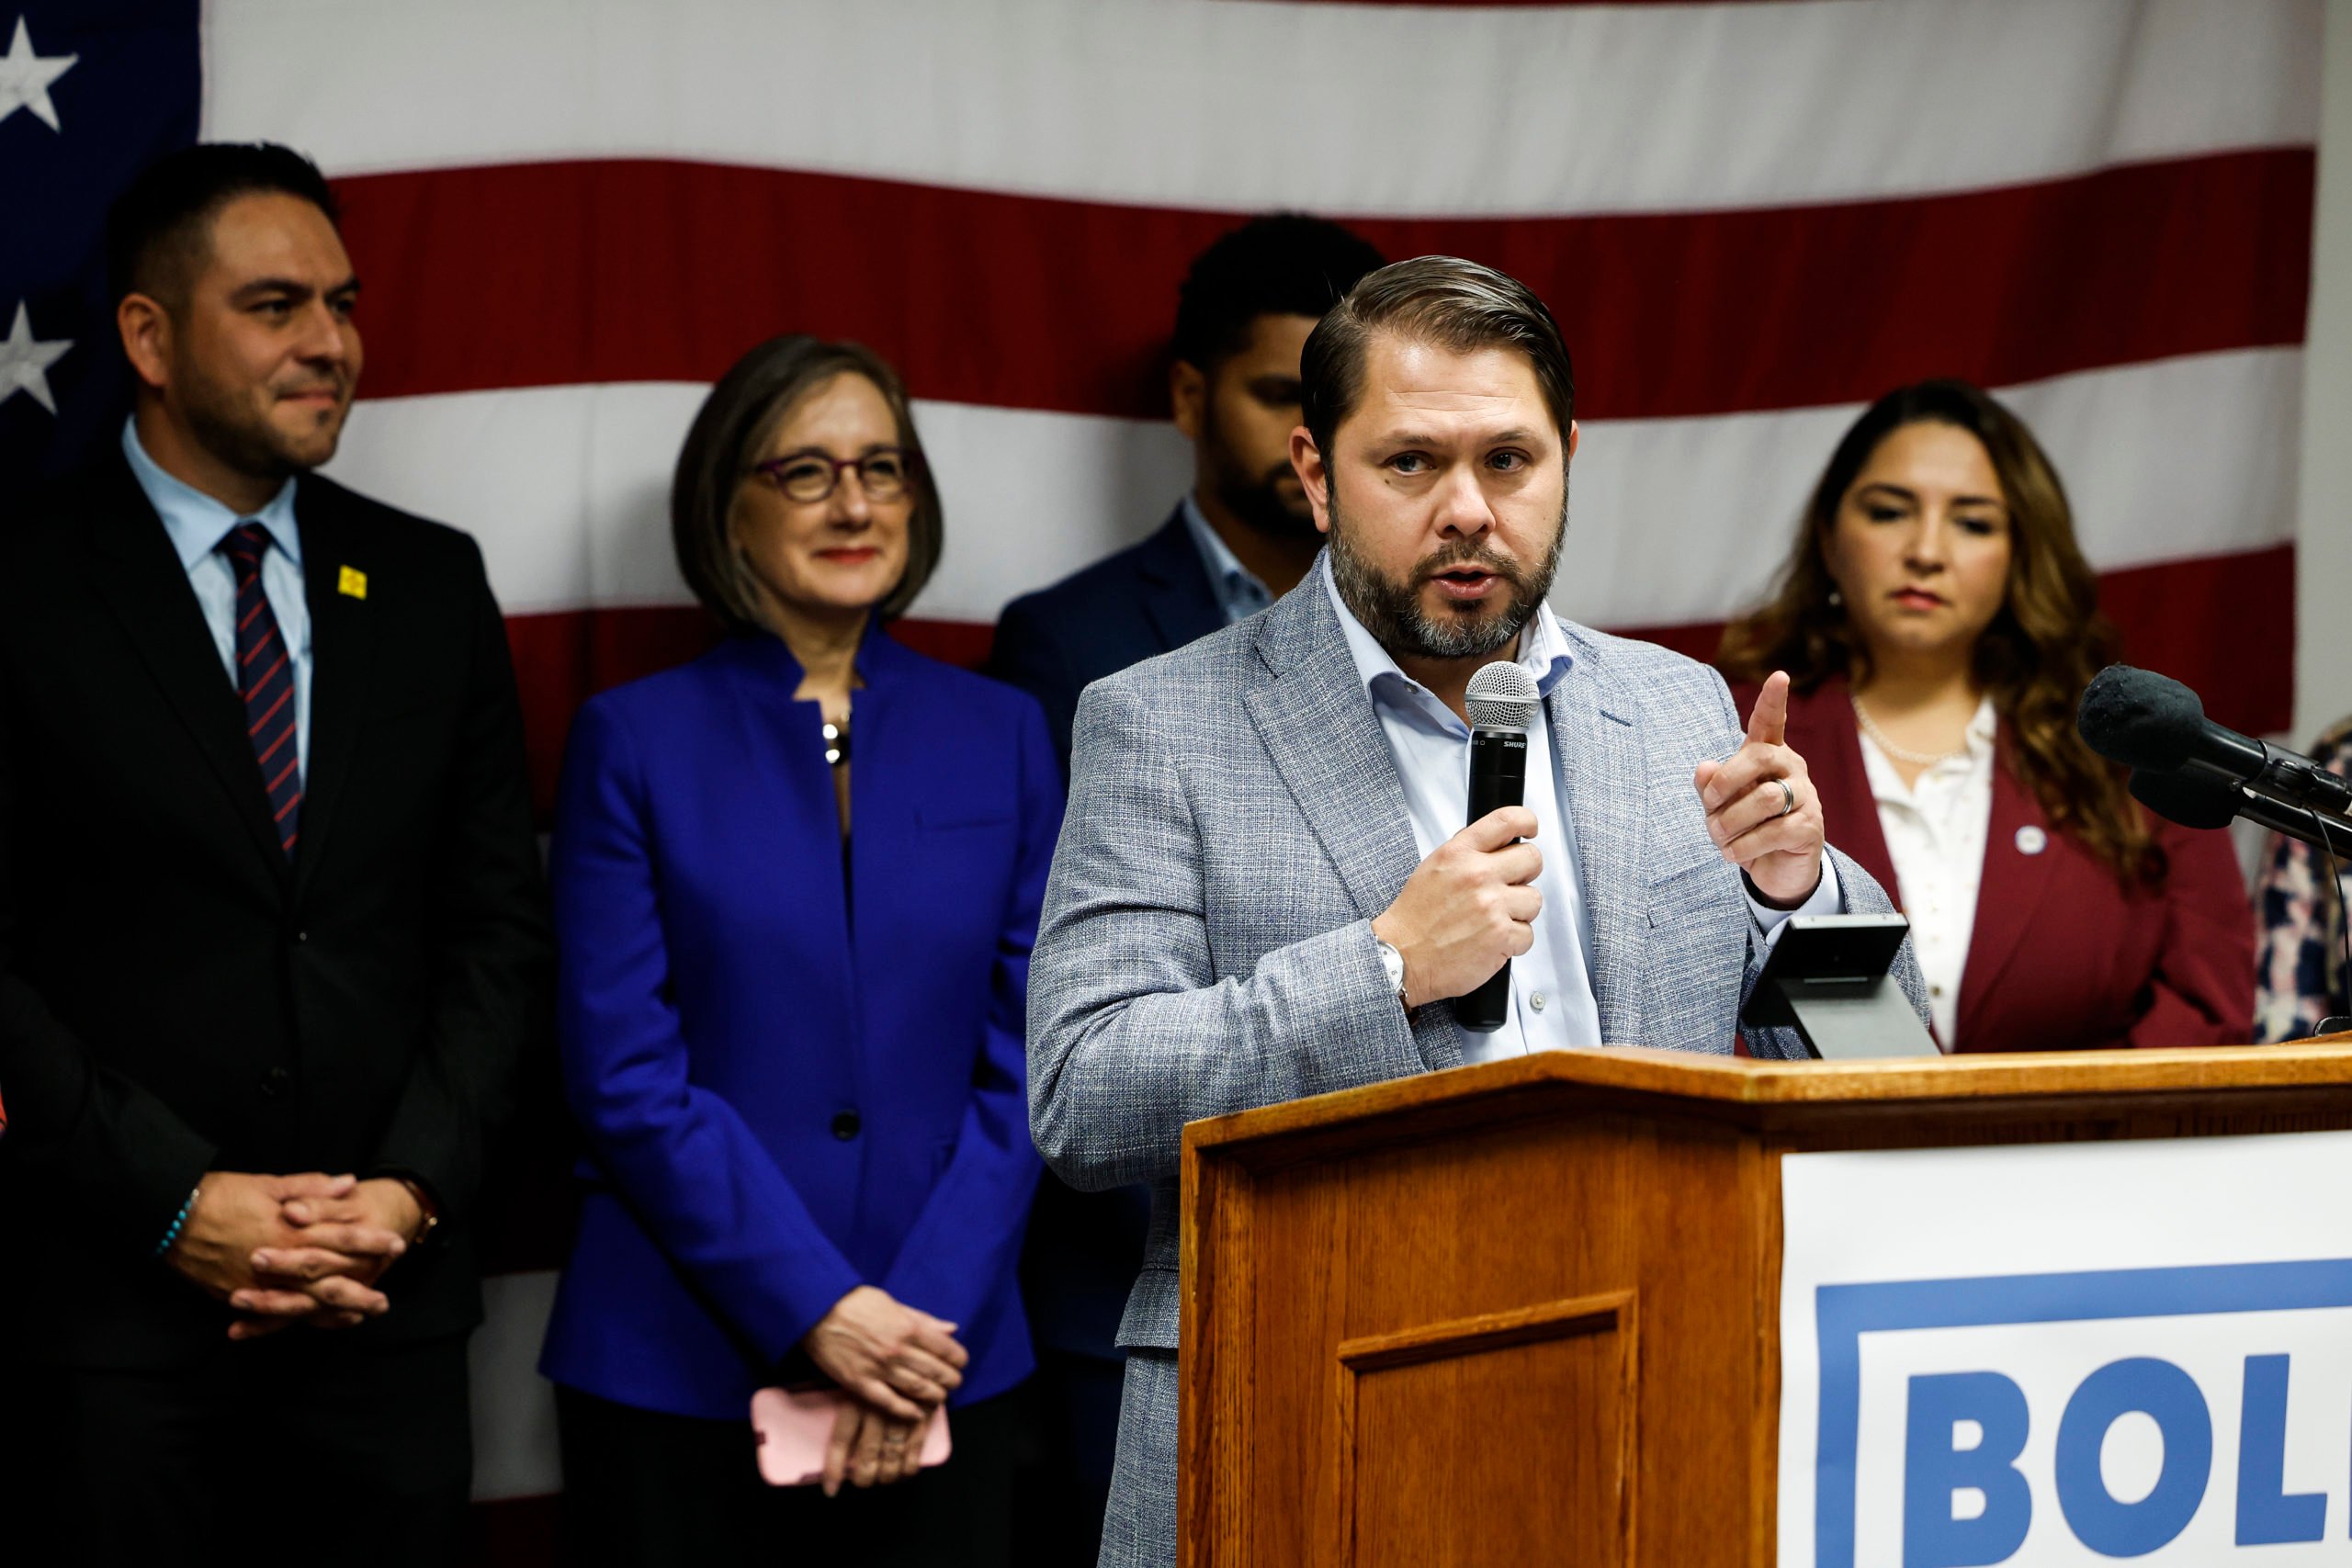 WASHINGTON, DC - NOVEMBER 18: Congressional Hispanic Caucus BOLD PAC Chairman Democratic Rep. Ruben Gallego (D-AZ) speaks at a Congressional Hispanic Caucus (CHC) event welcoming new Latino members to Congress at the headquarters of the Democratic National Committee (DNC) on November 18, 2022 in Washington, DC. The BOLD PAC, Democratic Political Action Committee who focus on increasing diversity in leadership in the House and Senate, welcomed nine new latino members to their caucus. (Photo by Anna Moneymaker/Getty Images)